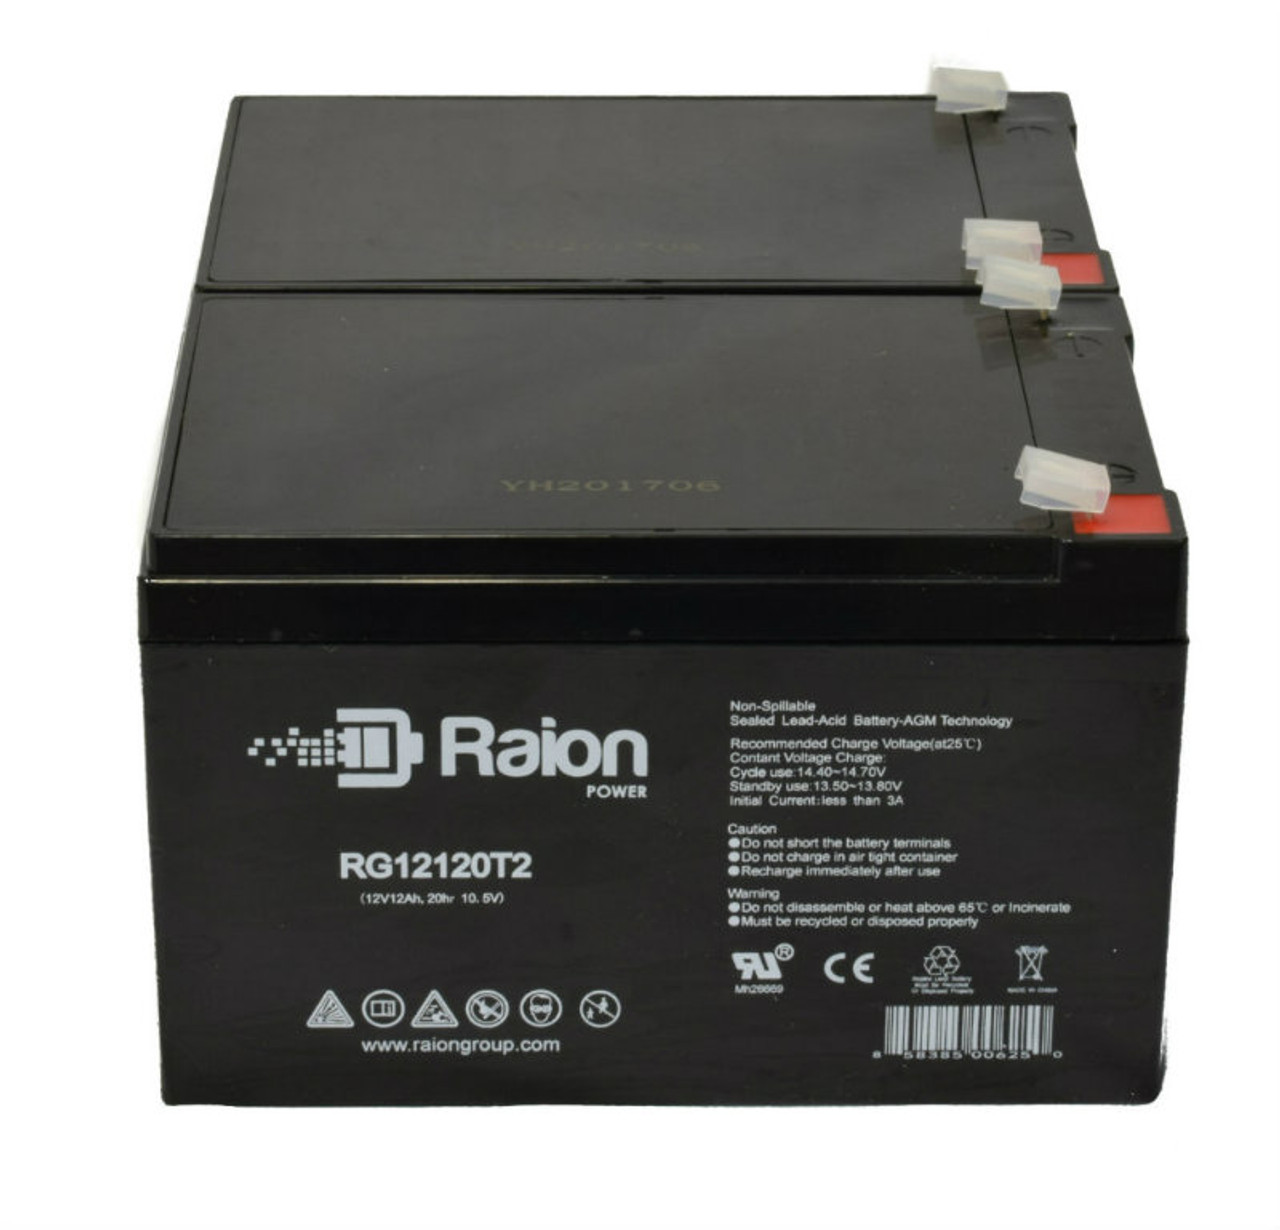 Raion Power 12V 12Ah Non-Spillable Compatible Replacement Battery for Zip'r Roo 3-Wheel - (2 Pack)